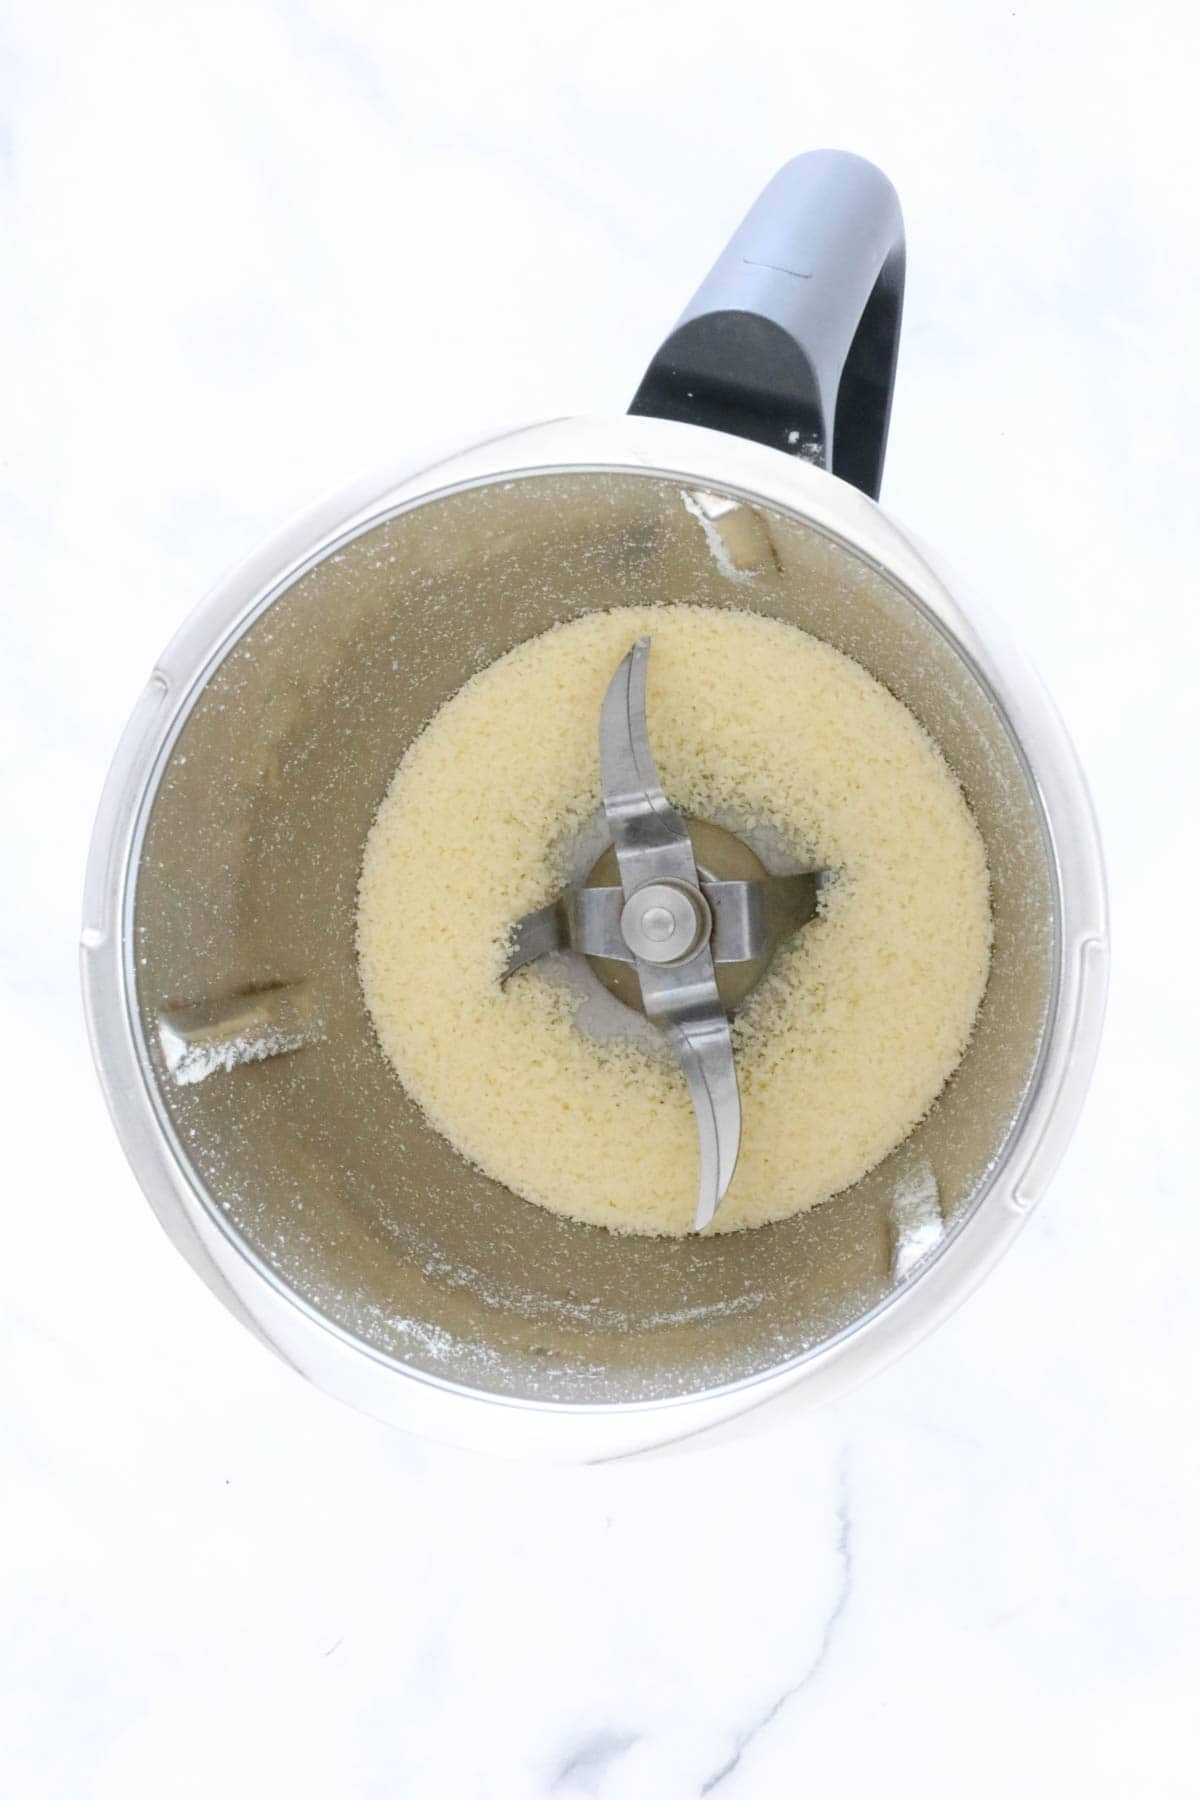 Grated parmesan in a Thermomix.